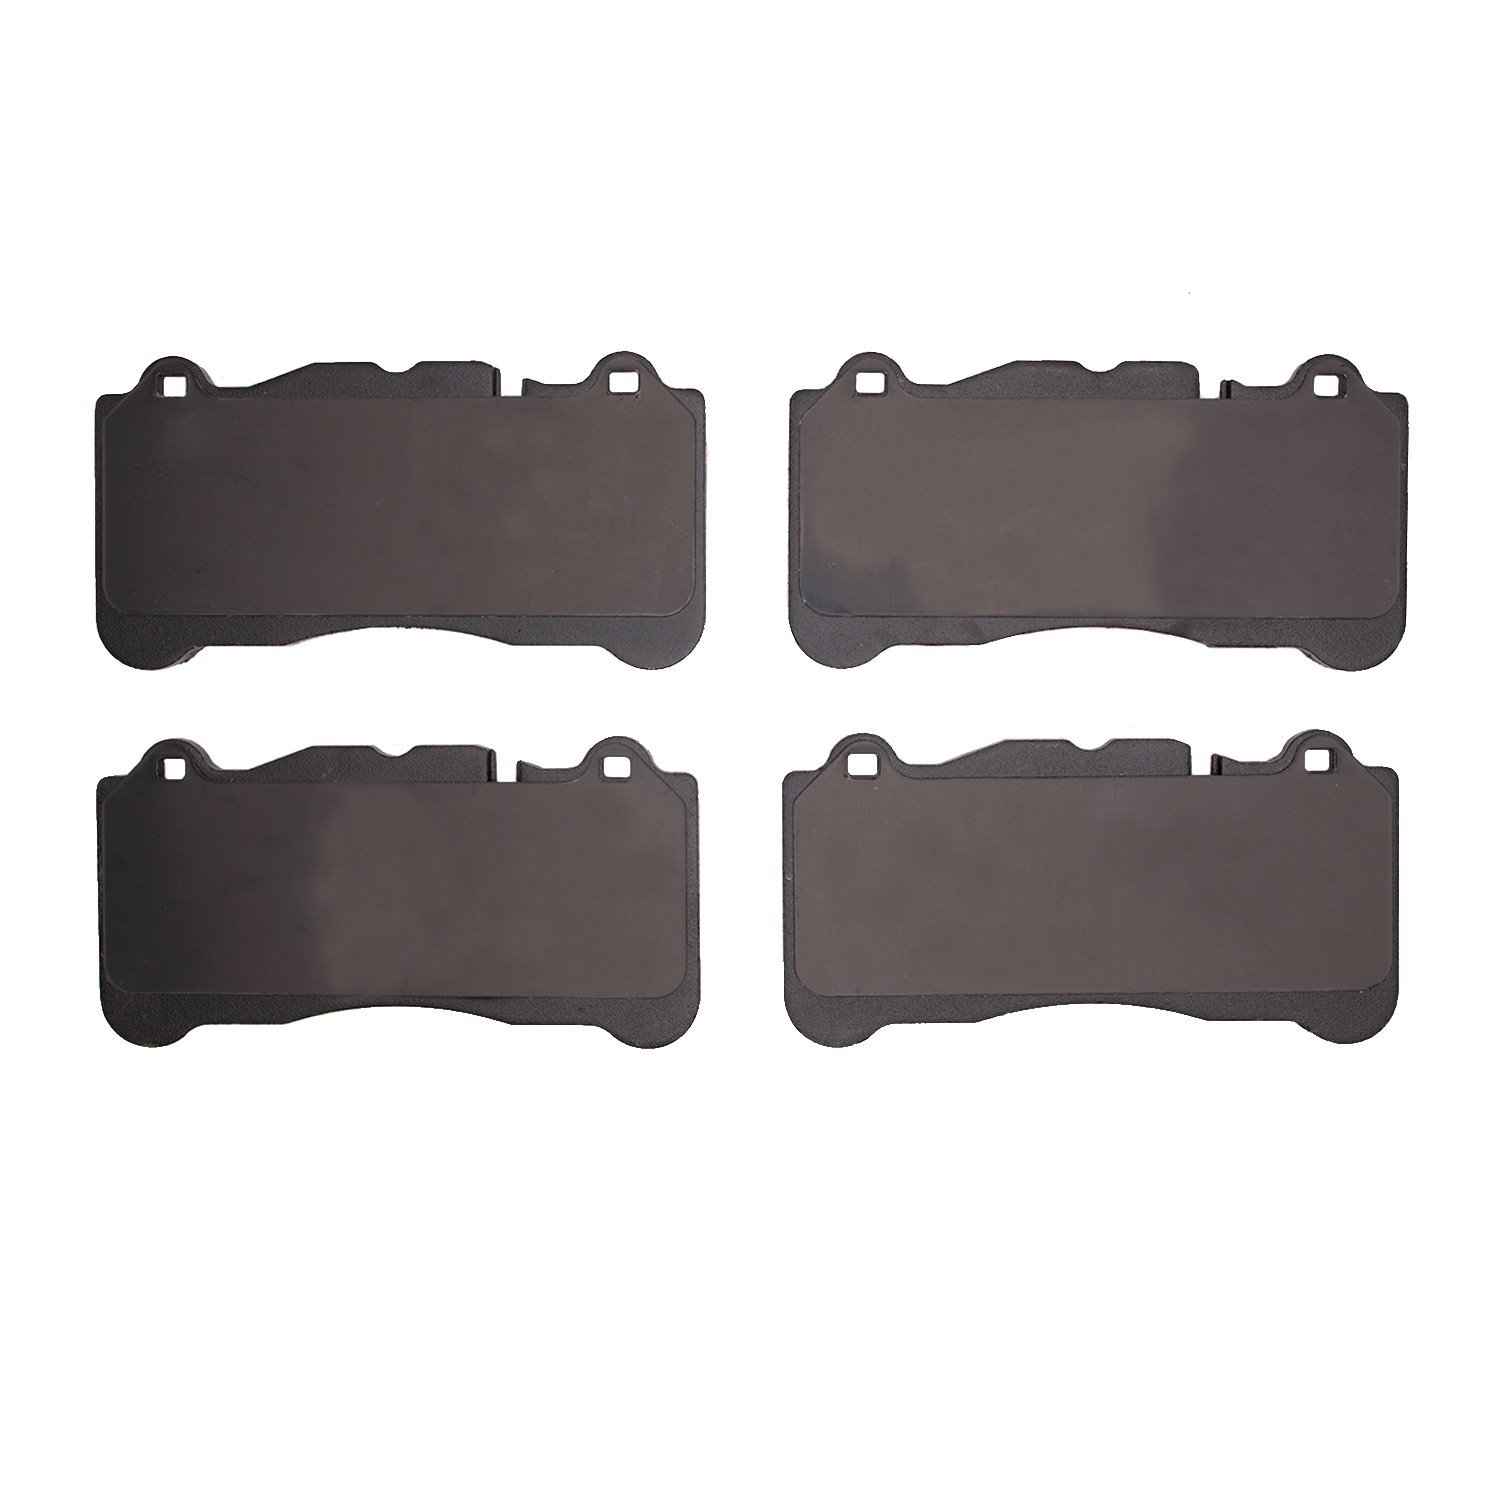 1551-1944-00 5000 Advanced Low-Metallic Brake Pads, Fits Select Multiple Makes/Models, Position: Front